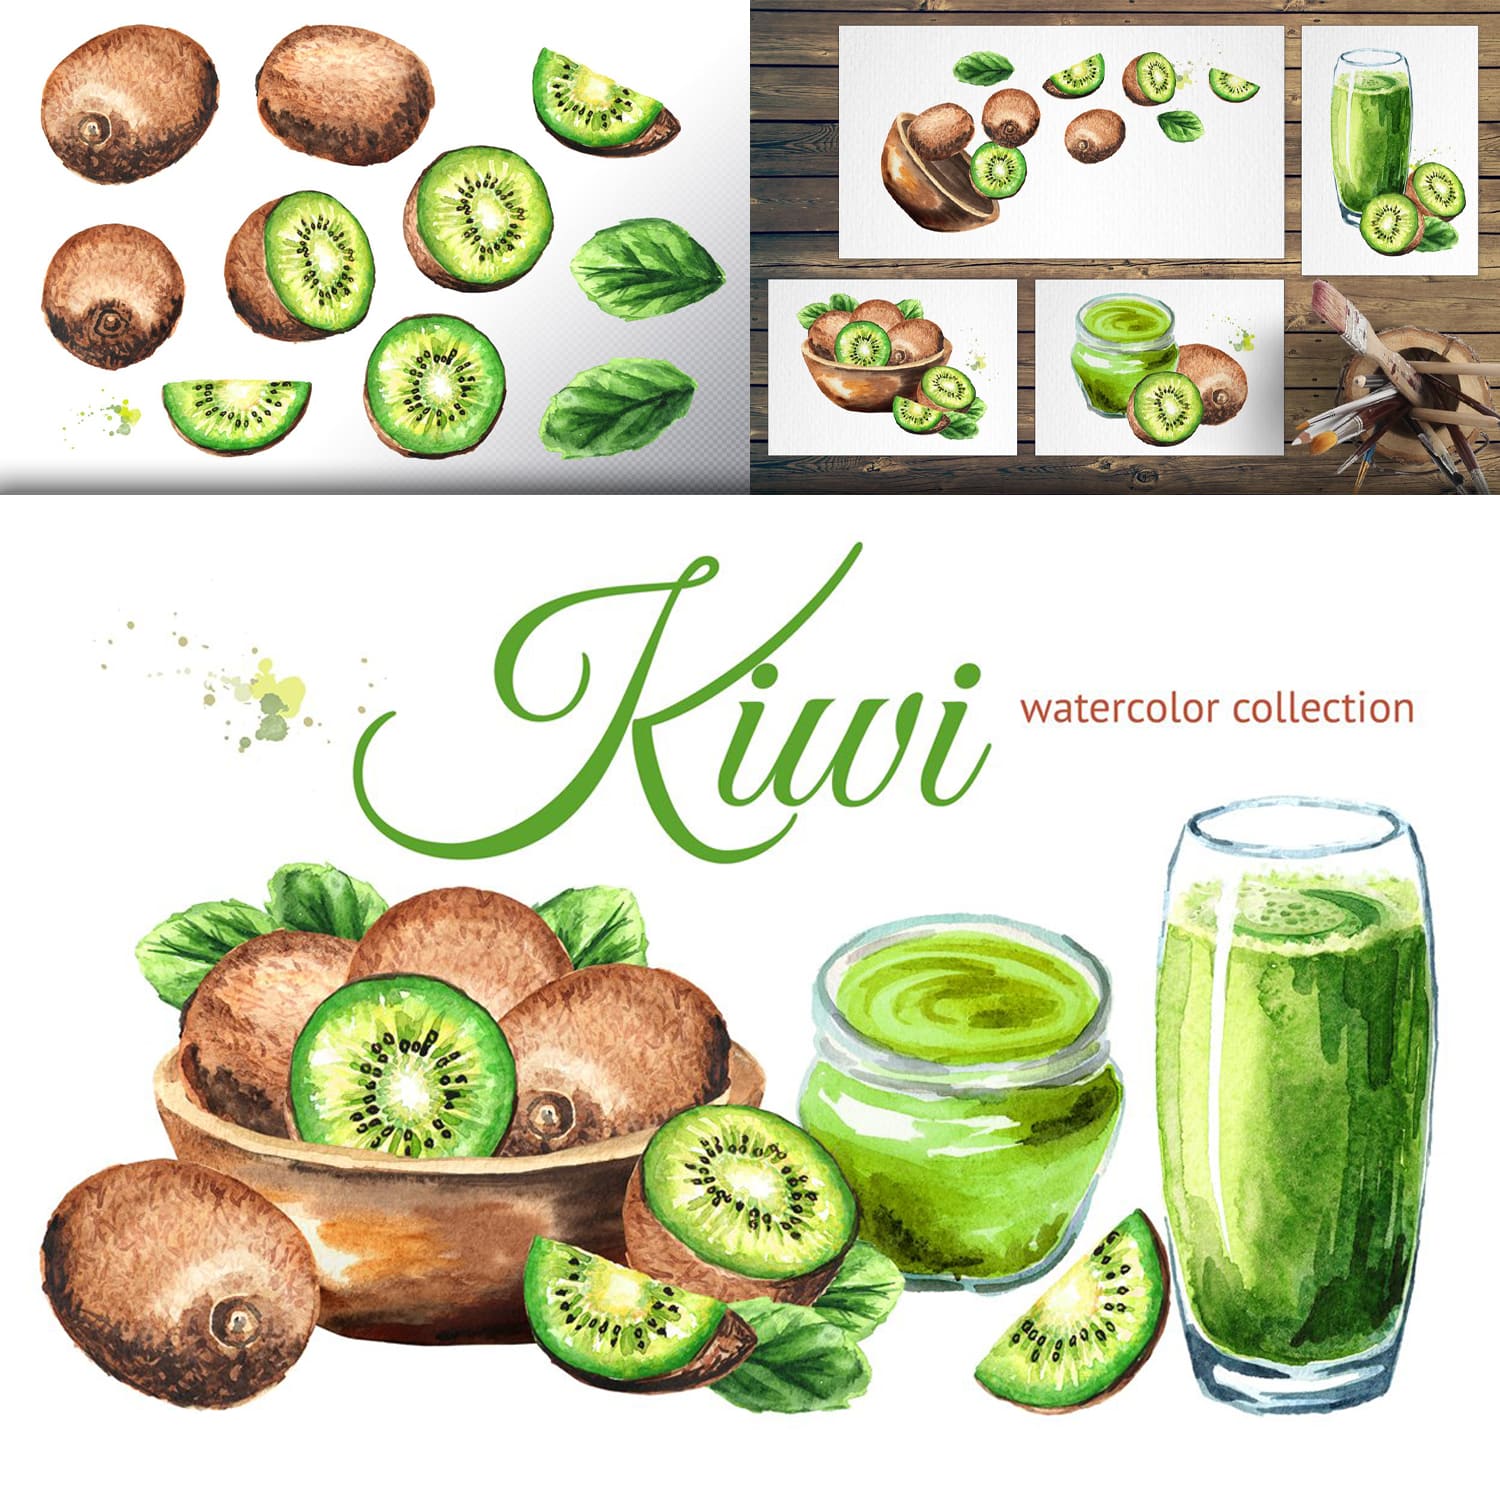 Kiwi. Watercolor collection.